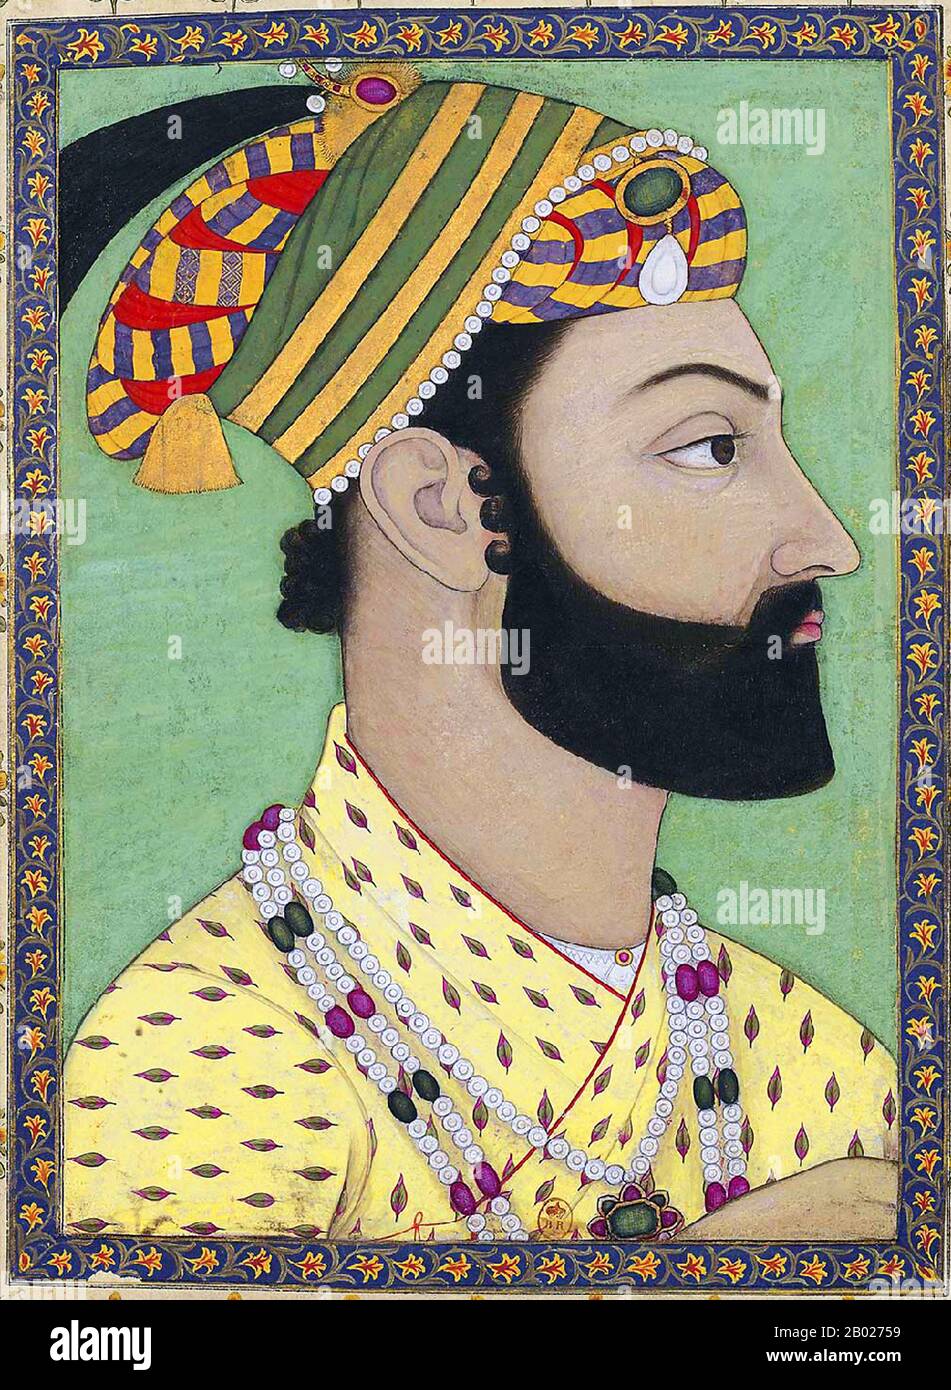 Ahmad Shah Durrani (1722-1772), also known as Ahmad Khan Abdali, was an Afghan ruler and king who founded the Durrani Empire, regarded by many as the founder of modern Afghanistan. Stock Photo